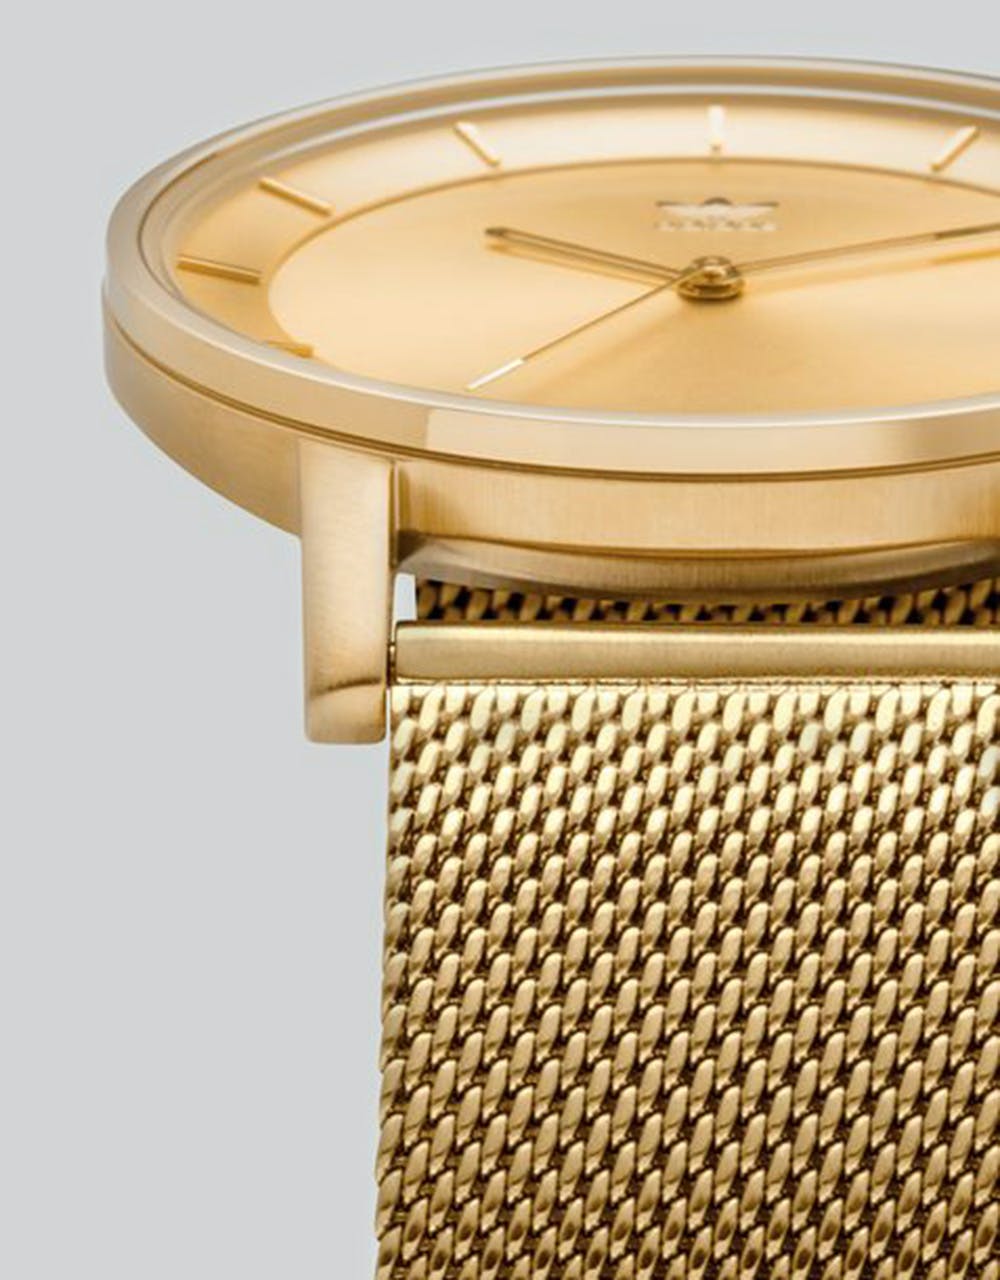 Adidas District M1 Watch - All Gold